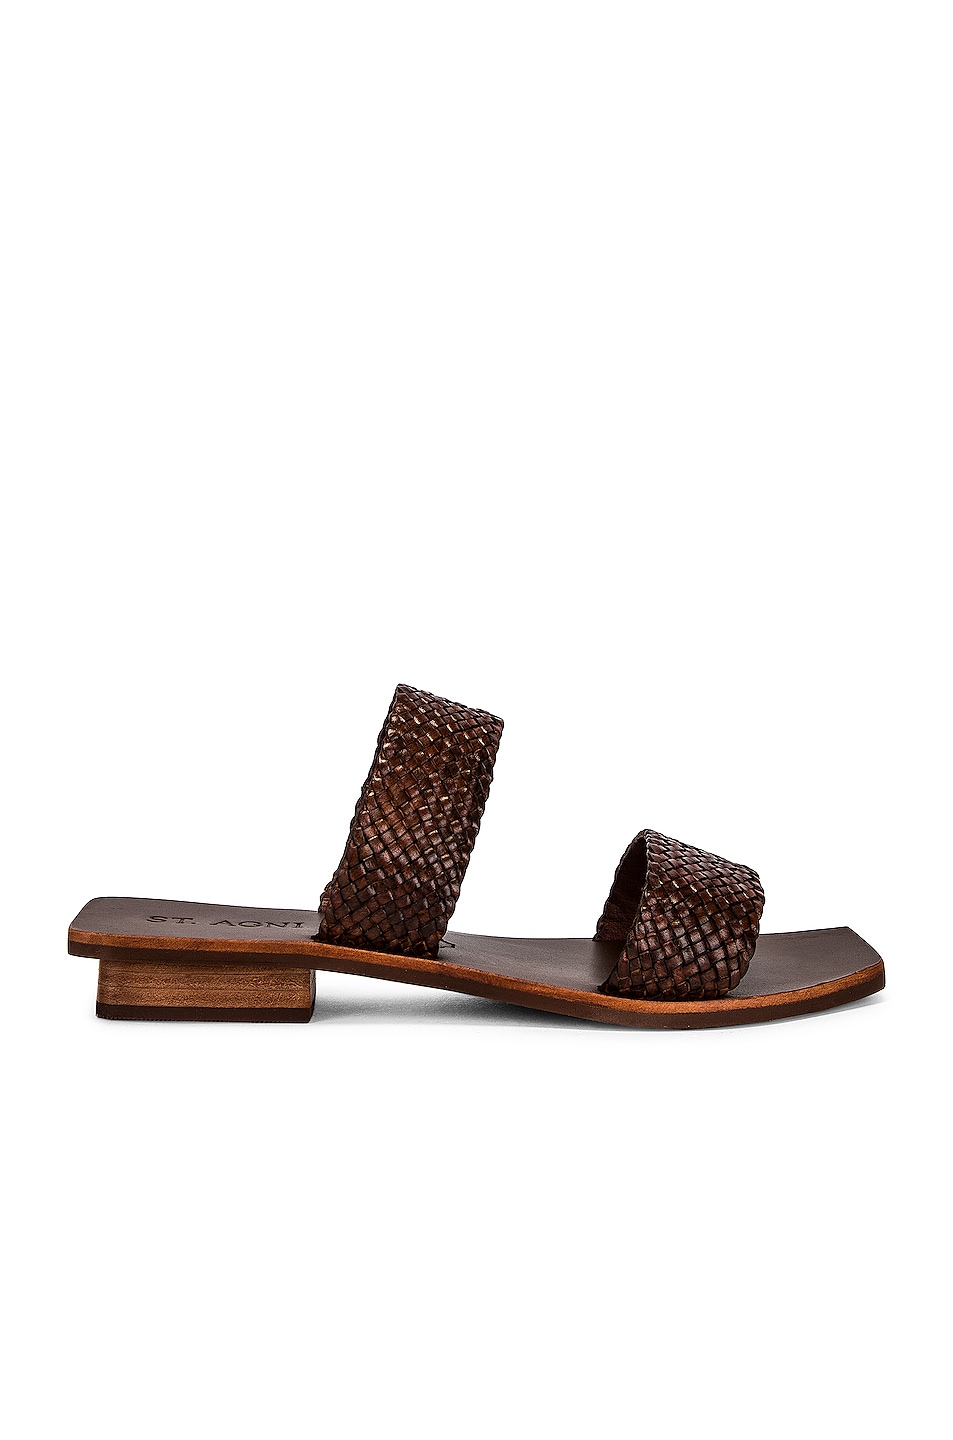 Image 1 of St. Agni Clea Woven Two Strap Sandal in Antique Tan